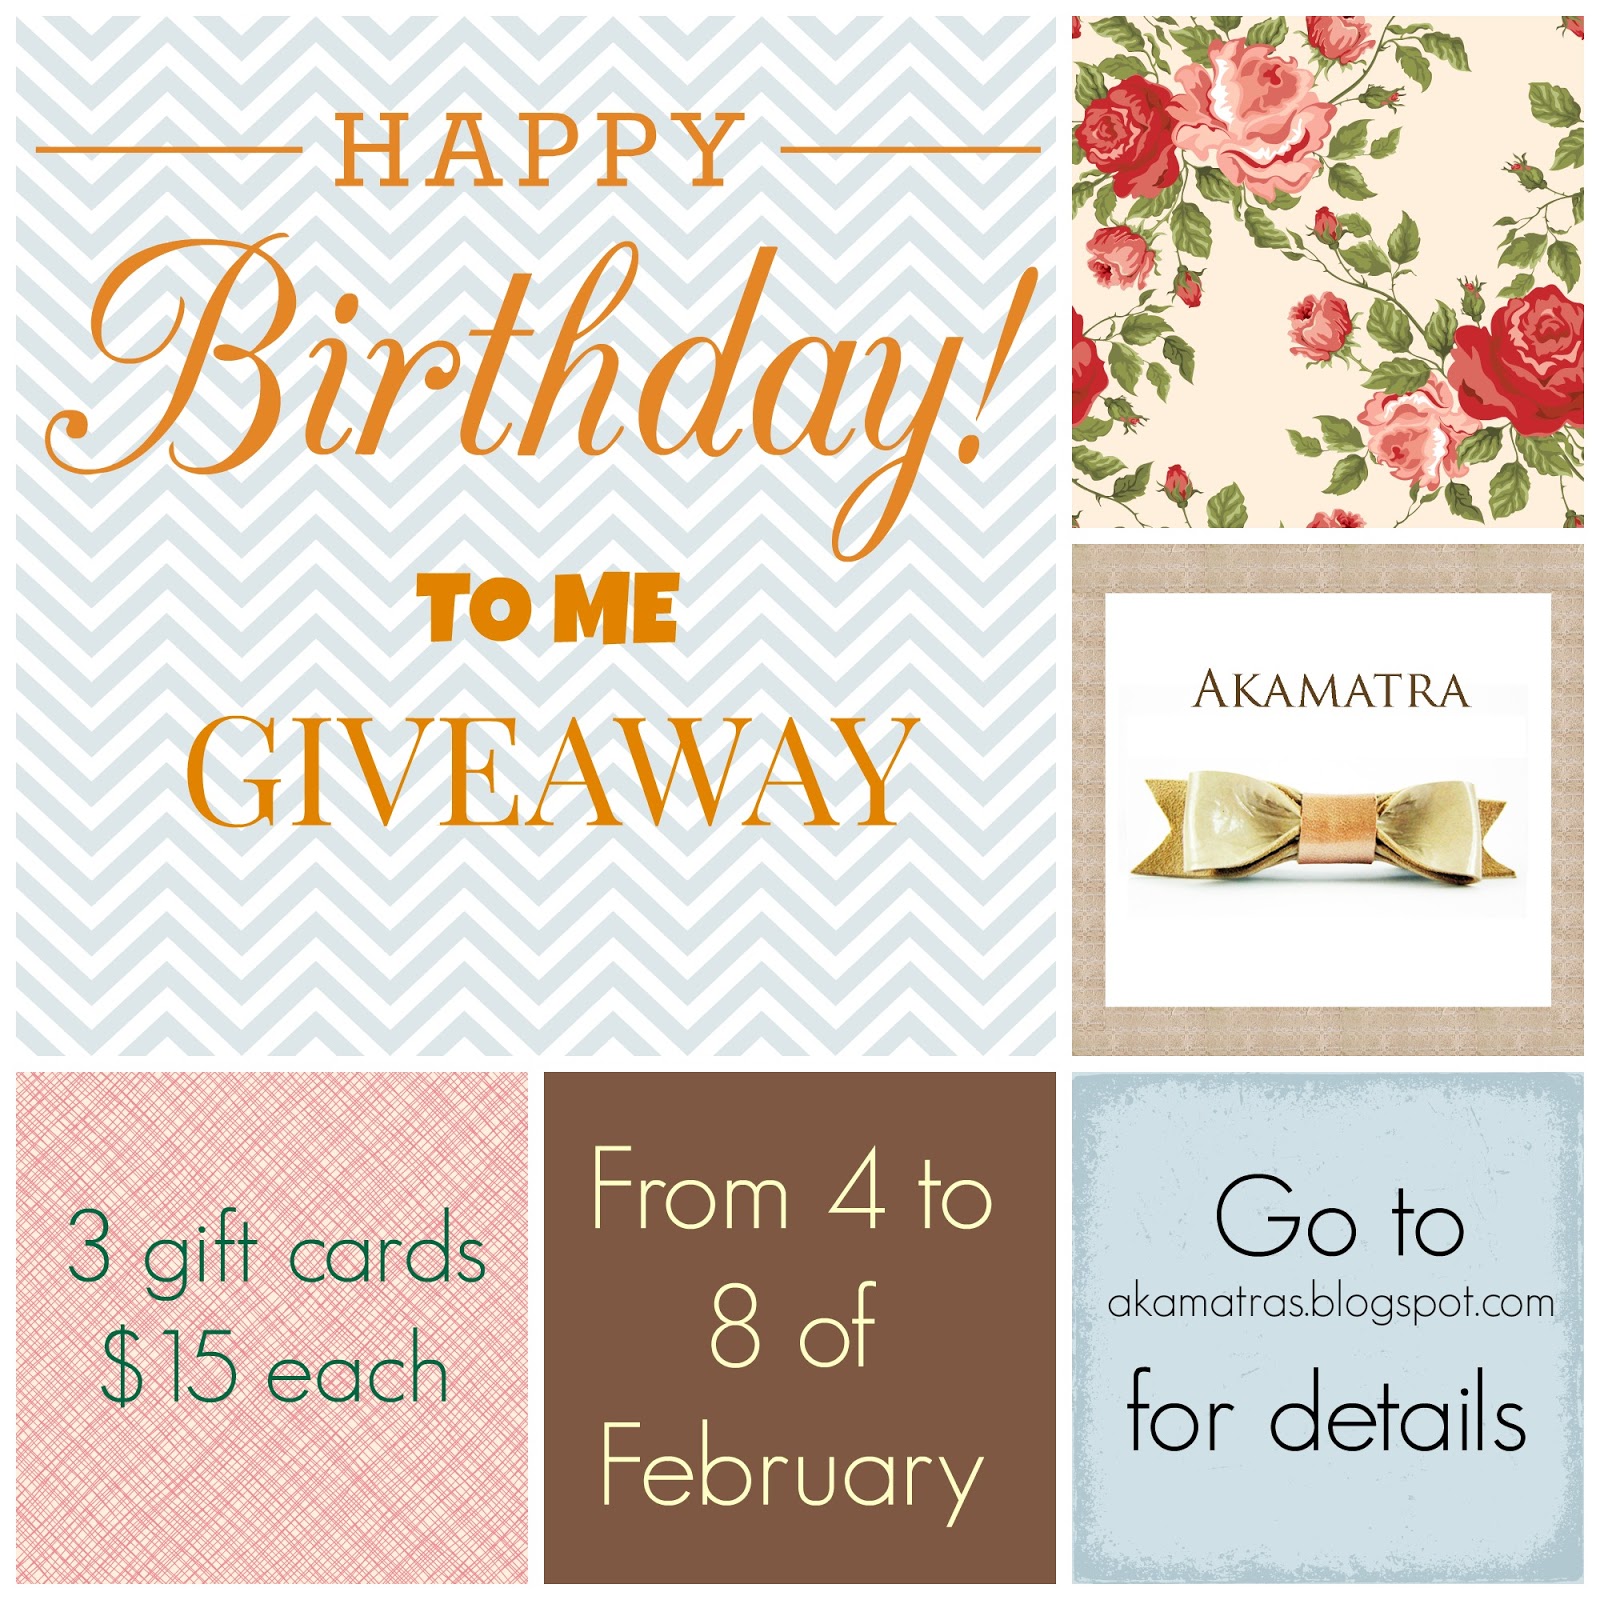 Happy Birthday to me Giveaway!!!